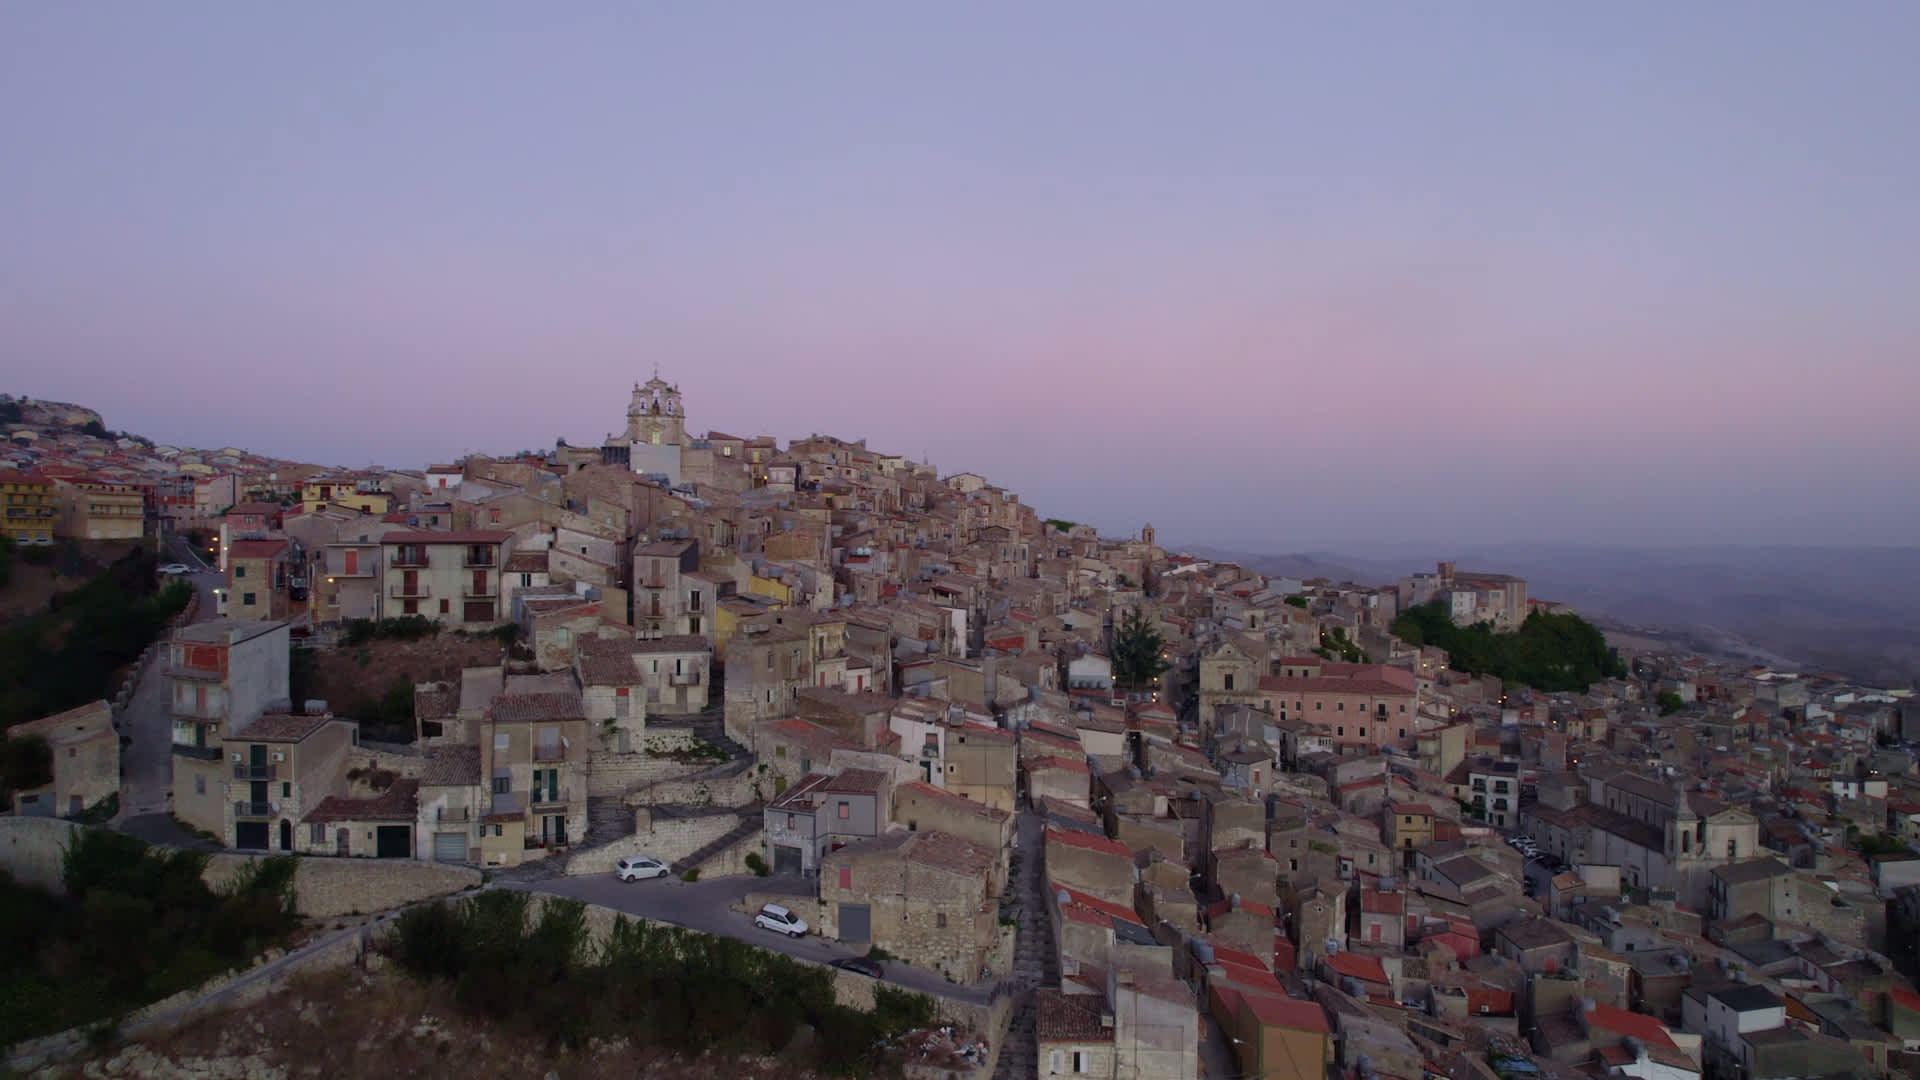 Mussomeli, Sicily, went viral for selling homes for 1 euro.